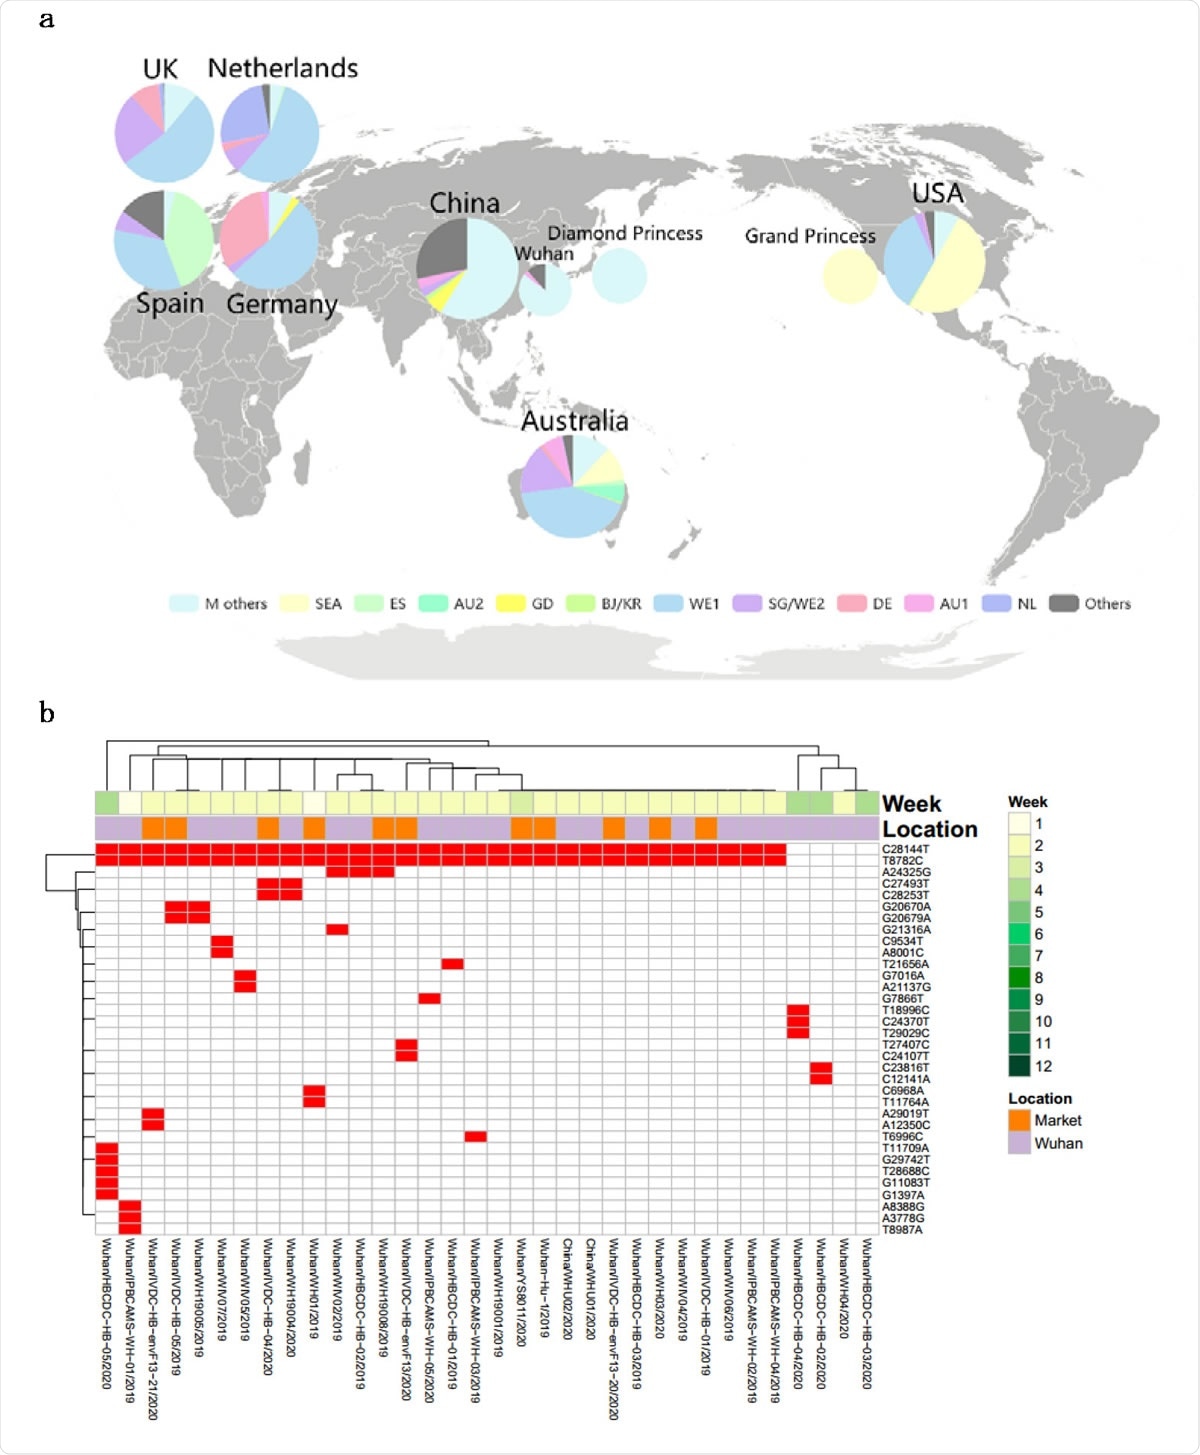 Major genotypes identified in the study. (a) Unsupervised mutaion clustering of all samples. Mutations concurently called from at least 5 samples were included. 11 distinctive major mutation profiles were identified based on clustering tree branches and were named mainly based on the geographic locations where a certain genotype was initially or mainly reported from. The two-letter ISO country codes were used to indicate the countries associated with the mutation profiles (as shown at lower color bar). The upper color bar demonstrates genotypic homogeneity within each clustering tree branch. (b) Pedigree chart of major genotypes. In combination of mutation clustering and available epidemiologic information, 11 distinctive main genotypes were characterized and the pedigree chart demonstrated the relationship of each genotype. The genotypes from Diamond Princess and Grand Princess derived from M type and SEA type respectively, were indicated with dashed arrows.